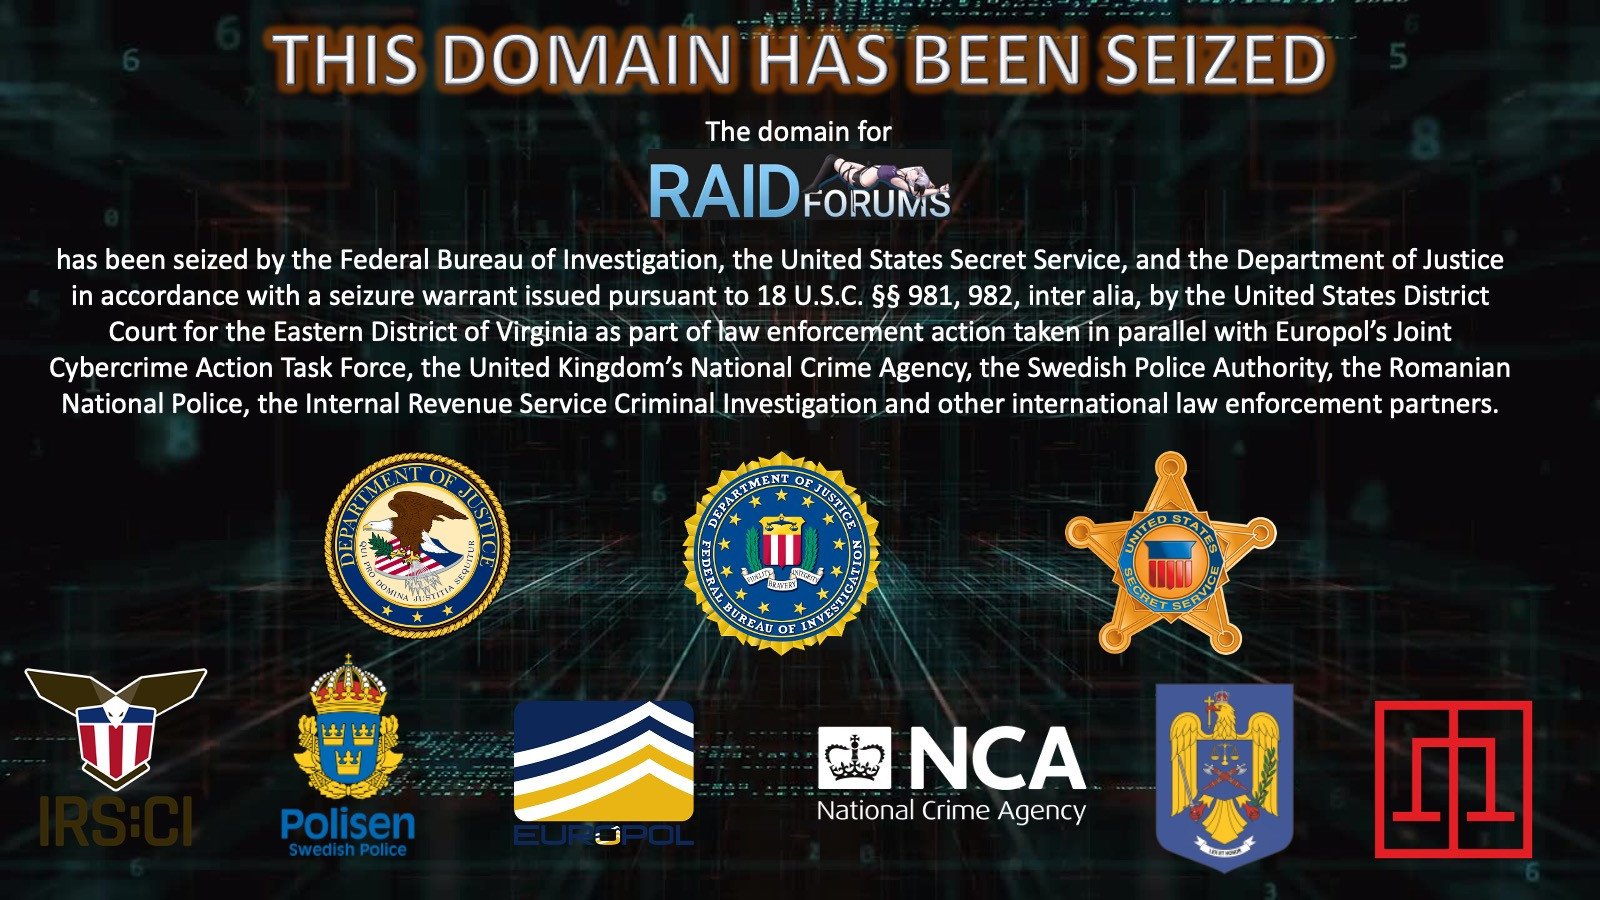 Authorities seize domains and infrastructure of RaidForums marketplace for stolen databases